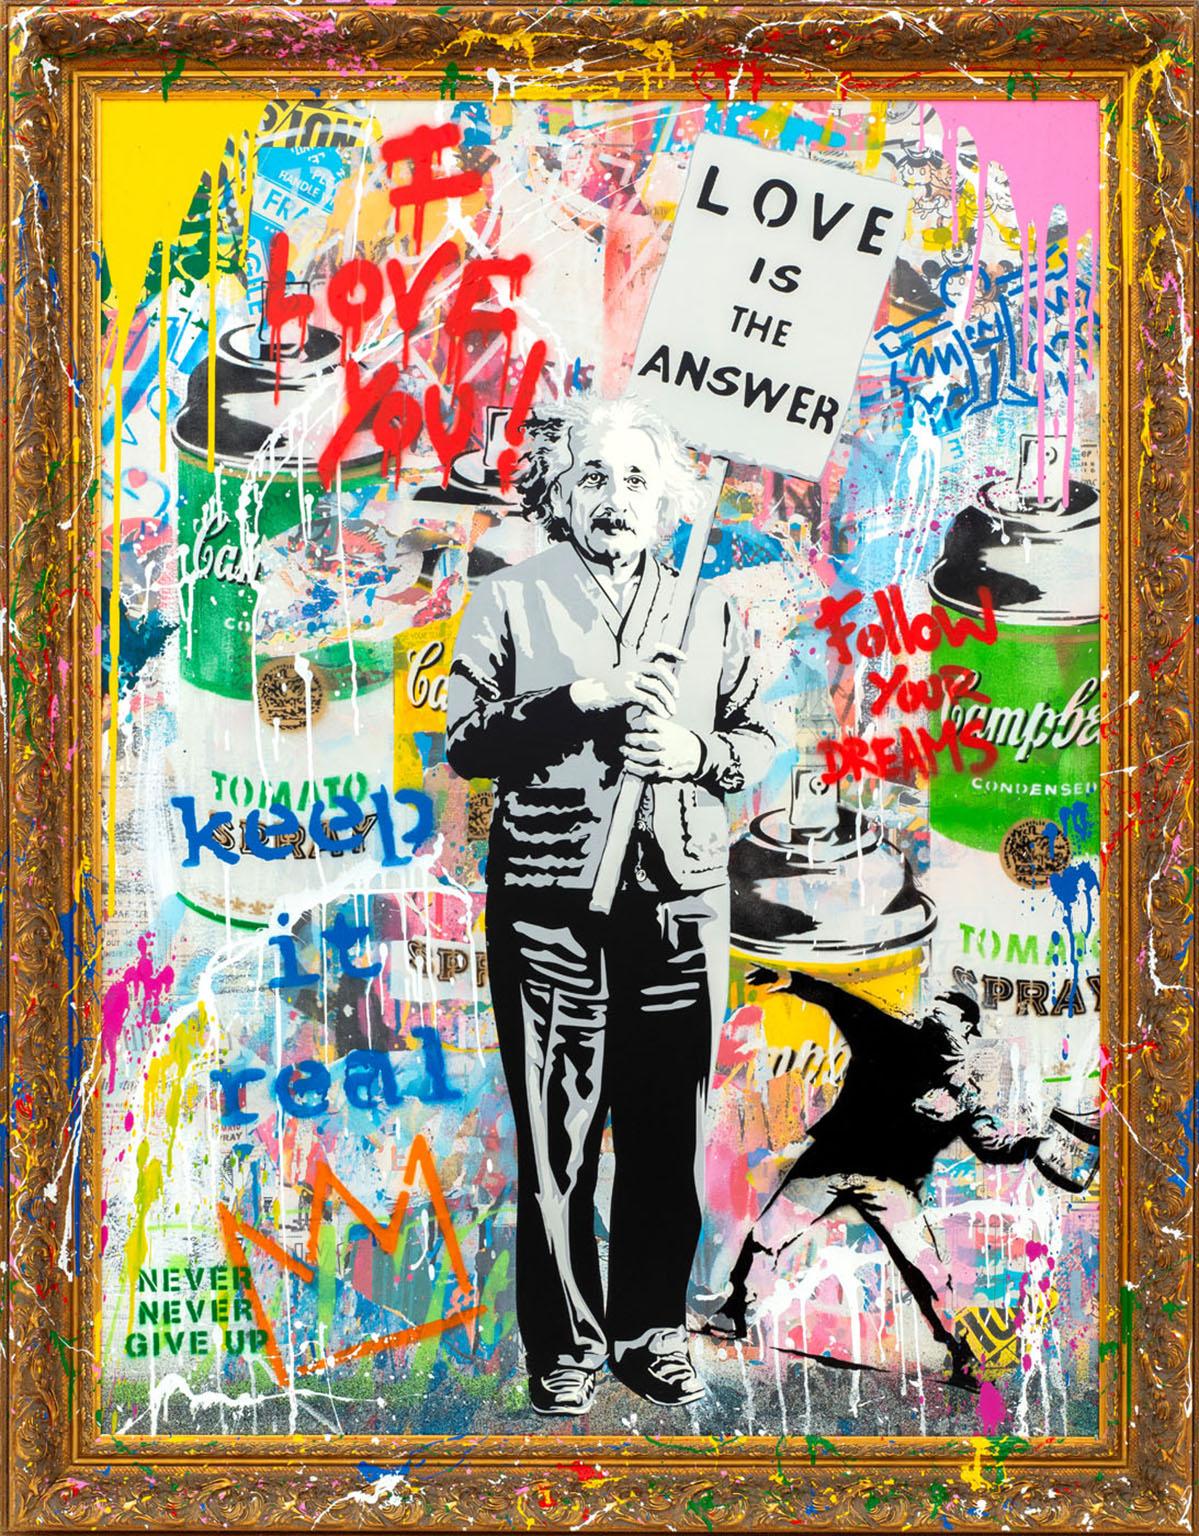 Direct from the artist's studio. 62"Einstein" silkscreen and mixed media on canvas in paint-splashed frame by artist Mr. Brainwash. Signed Mr. Brainwash on front lower left. Dated 2022, signed Mr. Brainwash, fingerprinted and numbered No. A14275772A